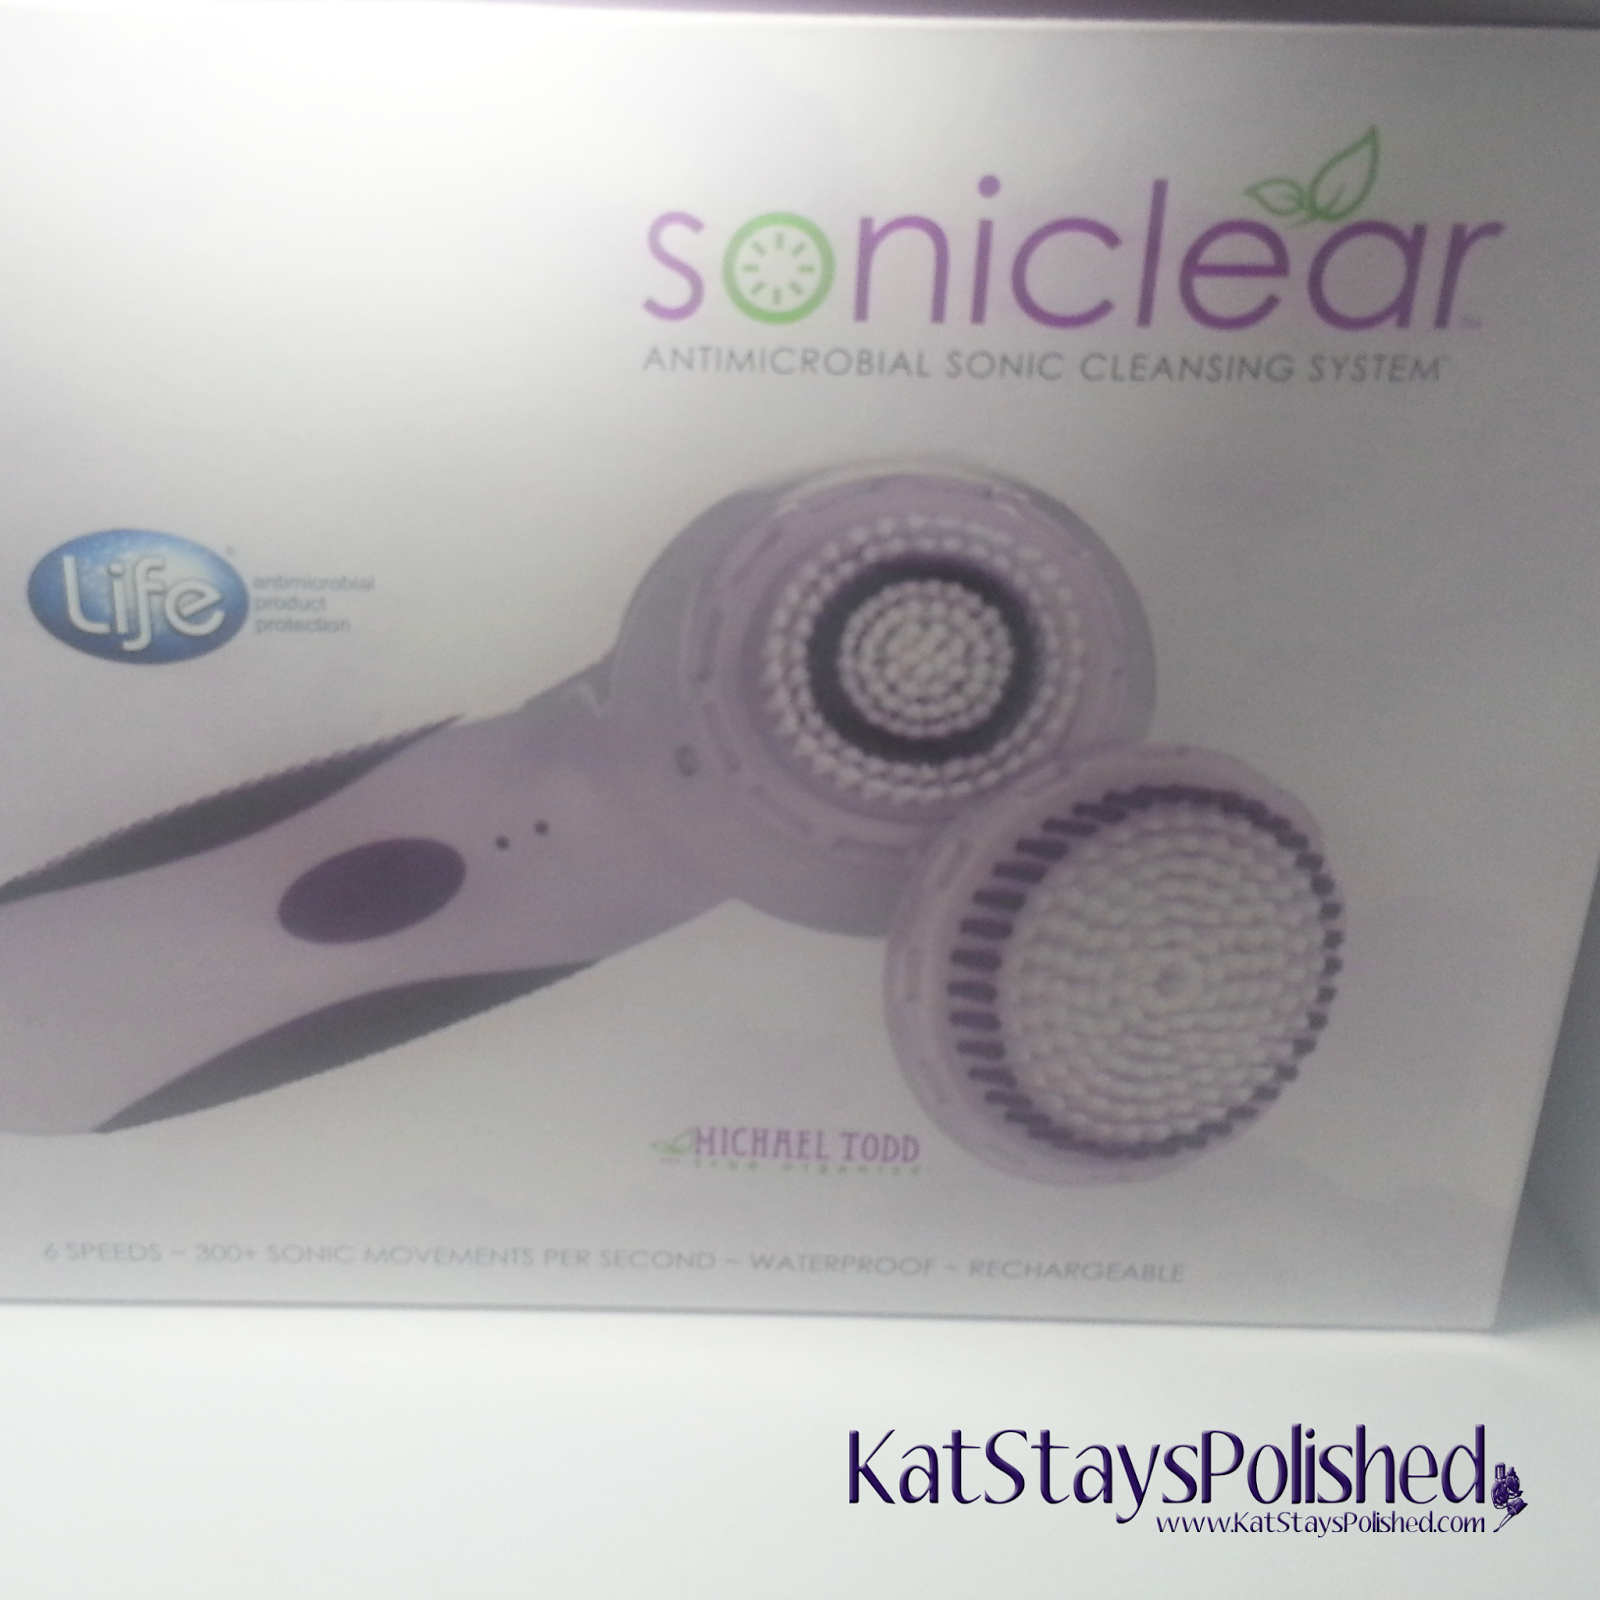 Michael Todd Soniclear | Kat Stays Polished